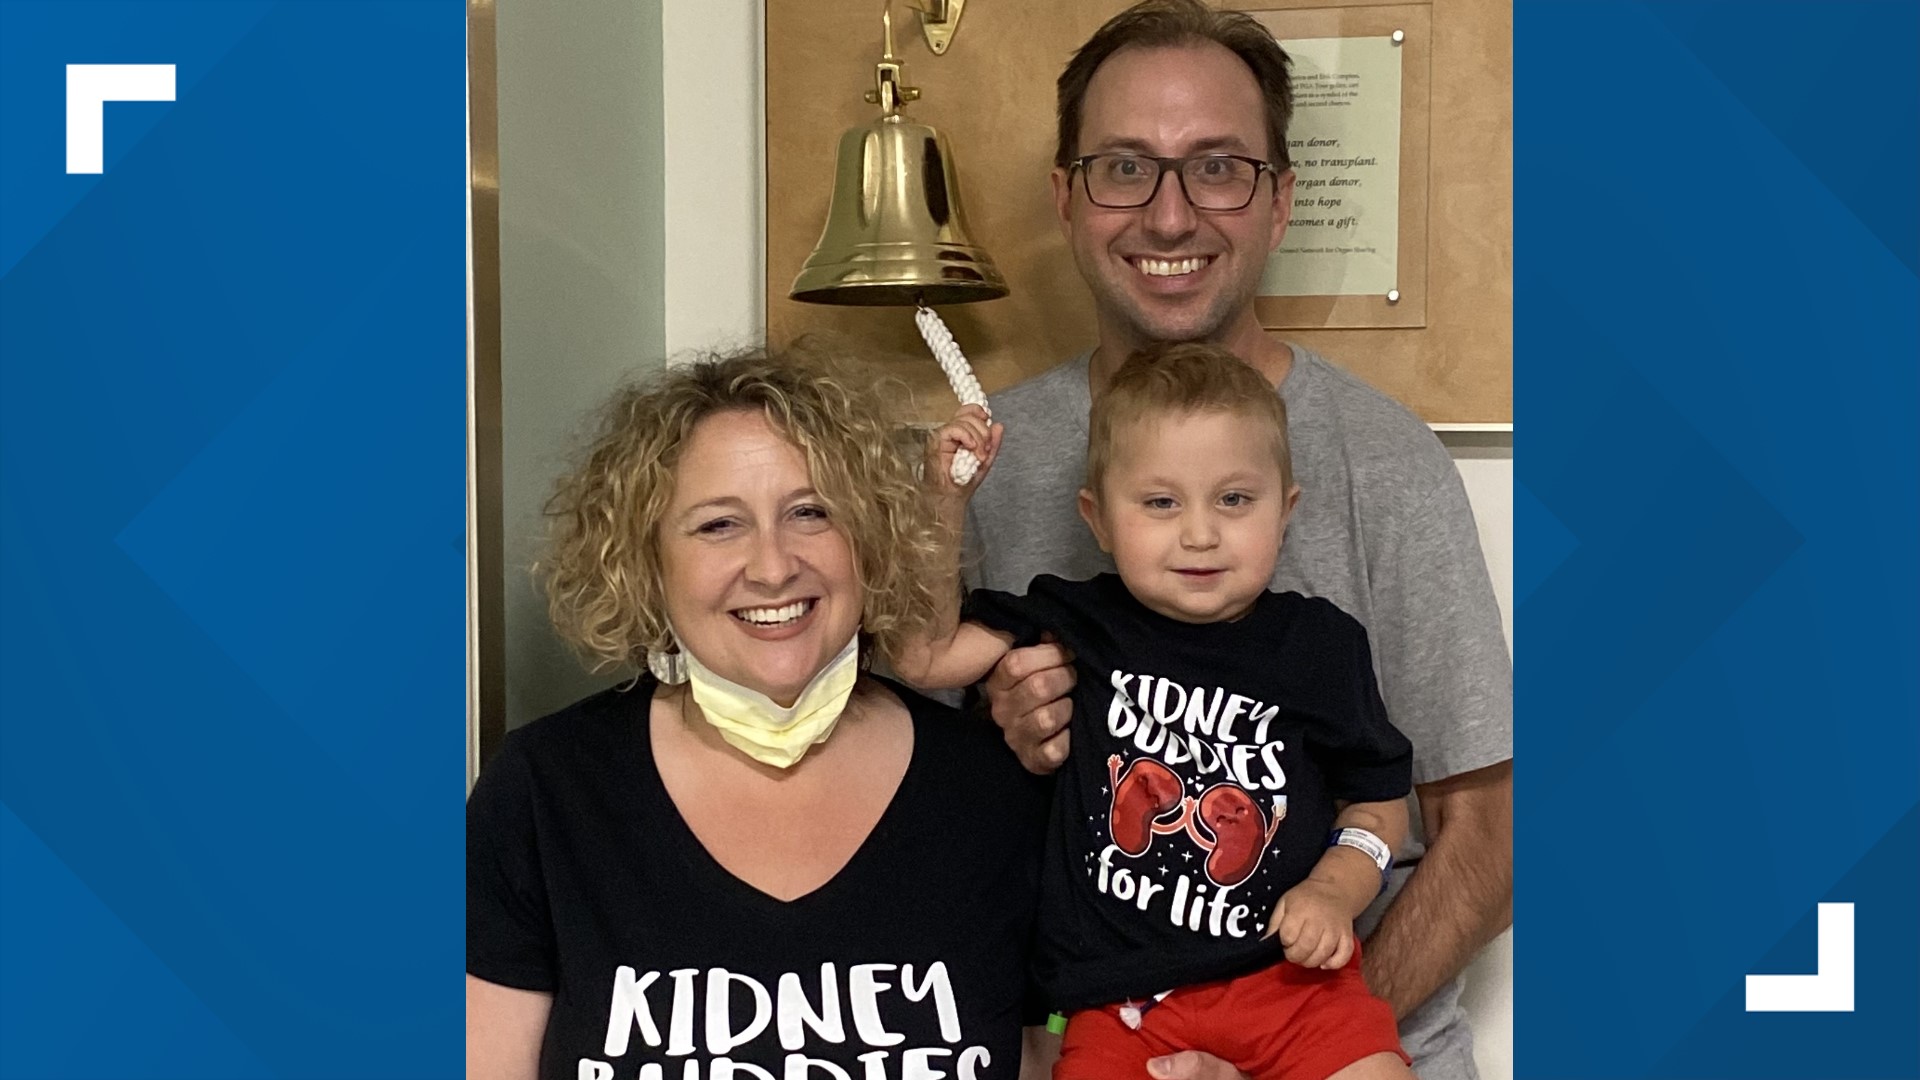 Pamela Bish donated her kidney to her 2-year-old son Carter.